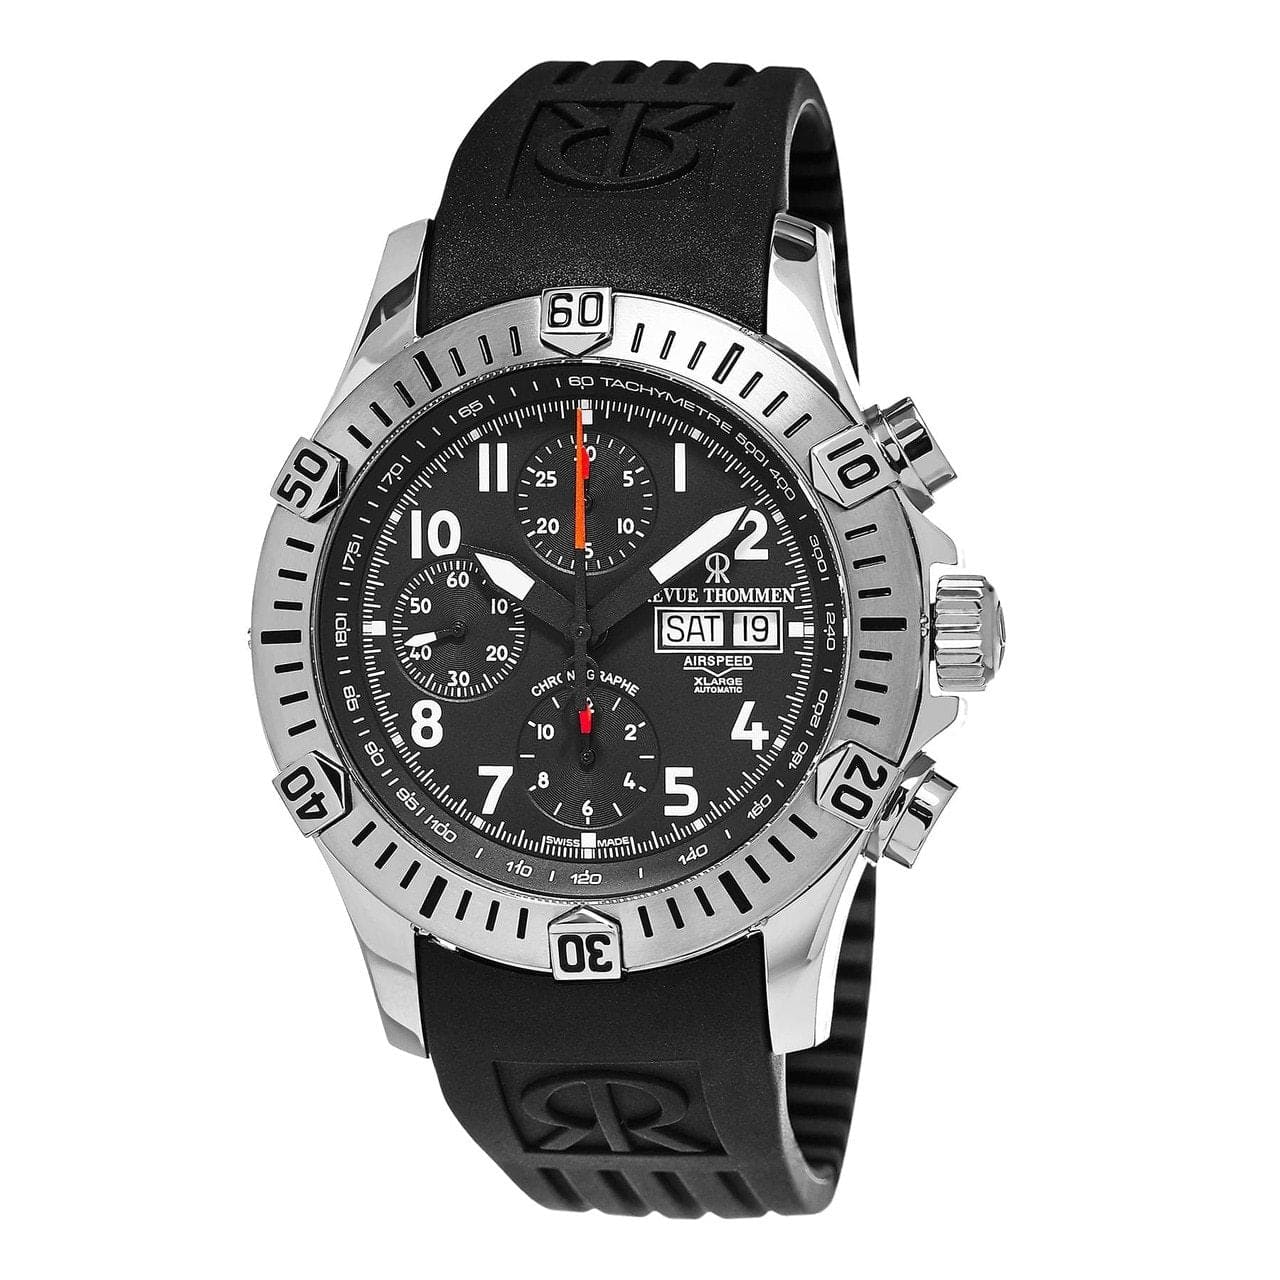 Revue Thommen 16071.6834 Airspeed XLarge Black Dial Rubber Chronograph Automatic Watch 794504234442